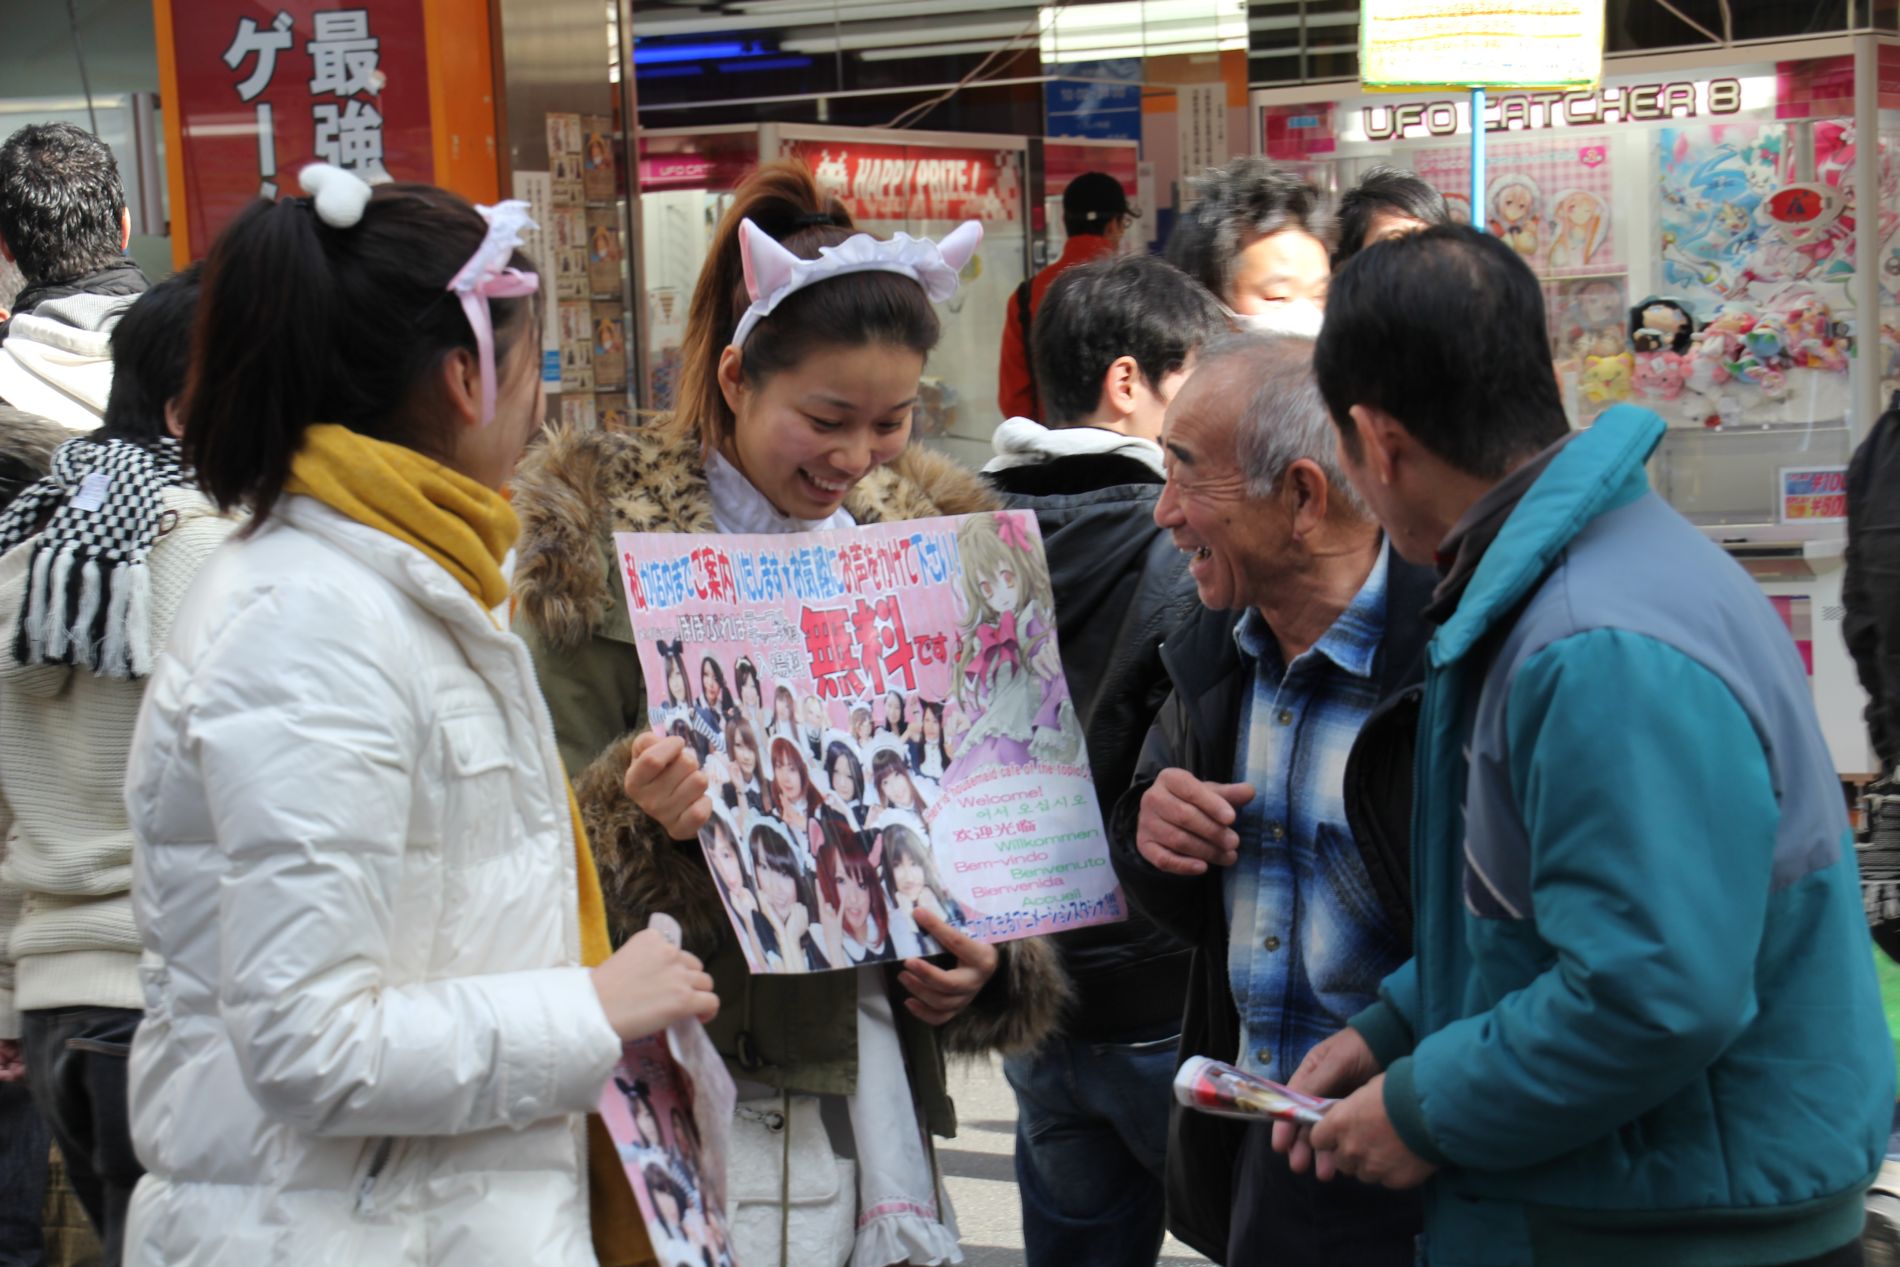 Two Japanese girls dressed as maids with cat ears flirt with men near a maid cafe in Akihabara, Tokyo, Japan.